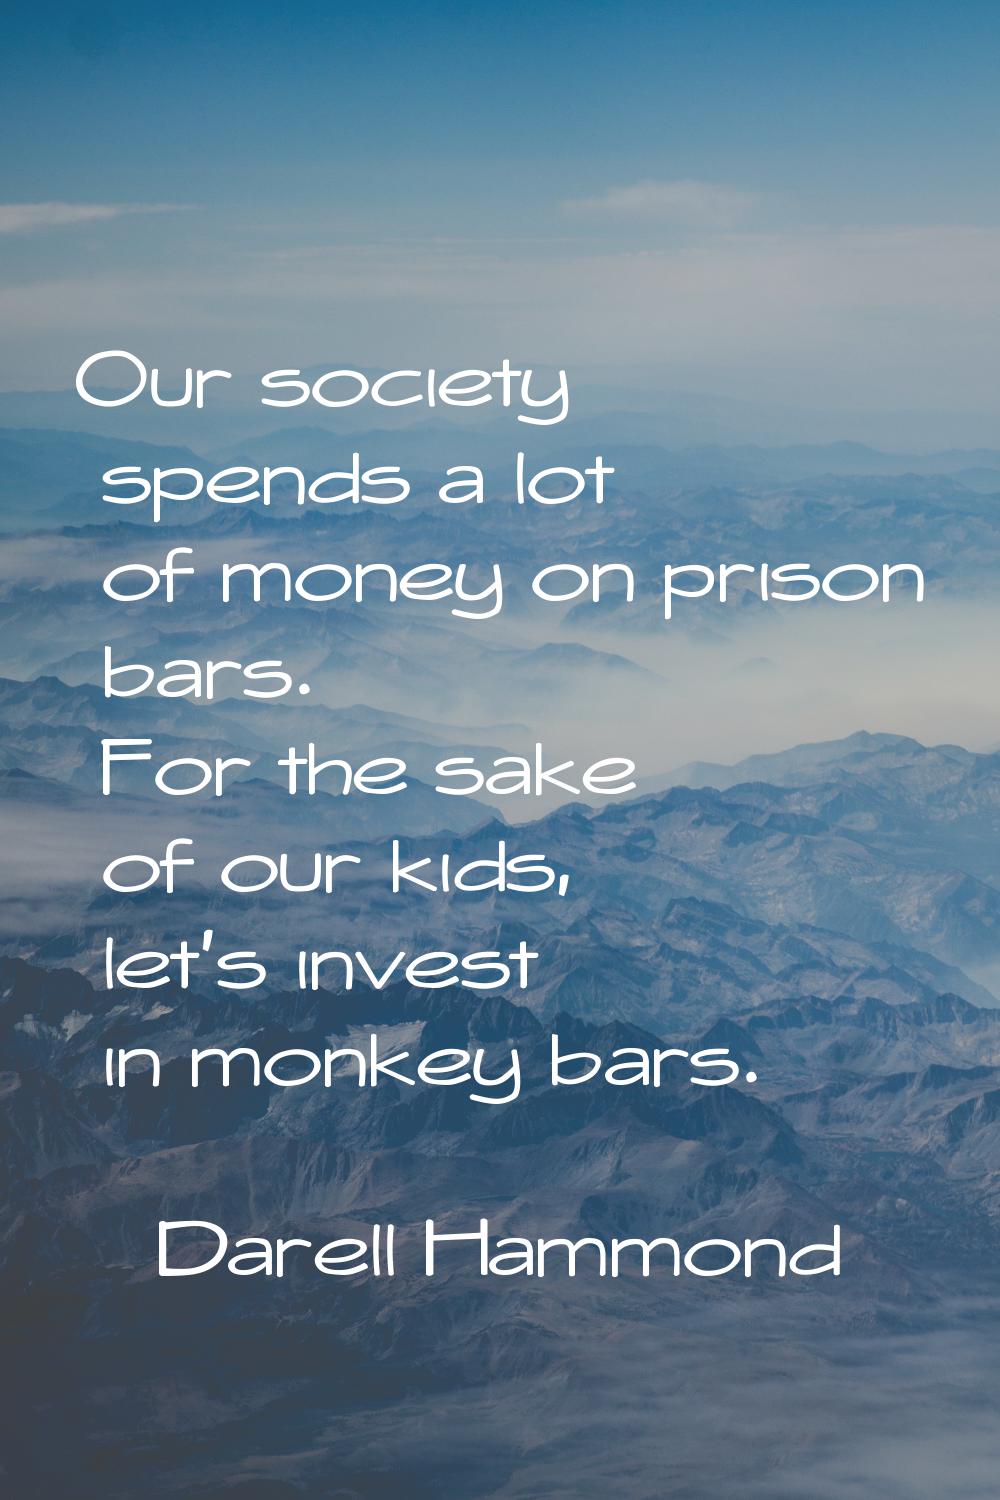 Our society spends a lot of money on prison bars. For the sake of our kids, let's invest in monkey 